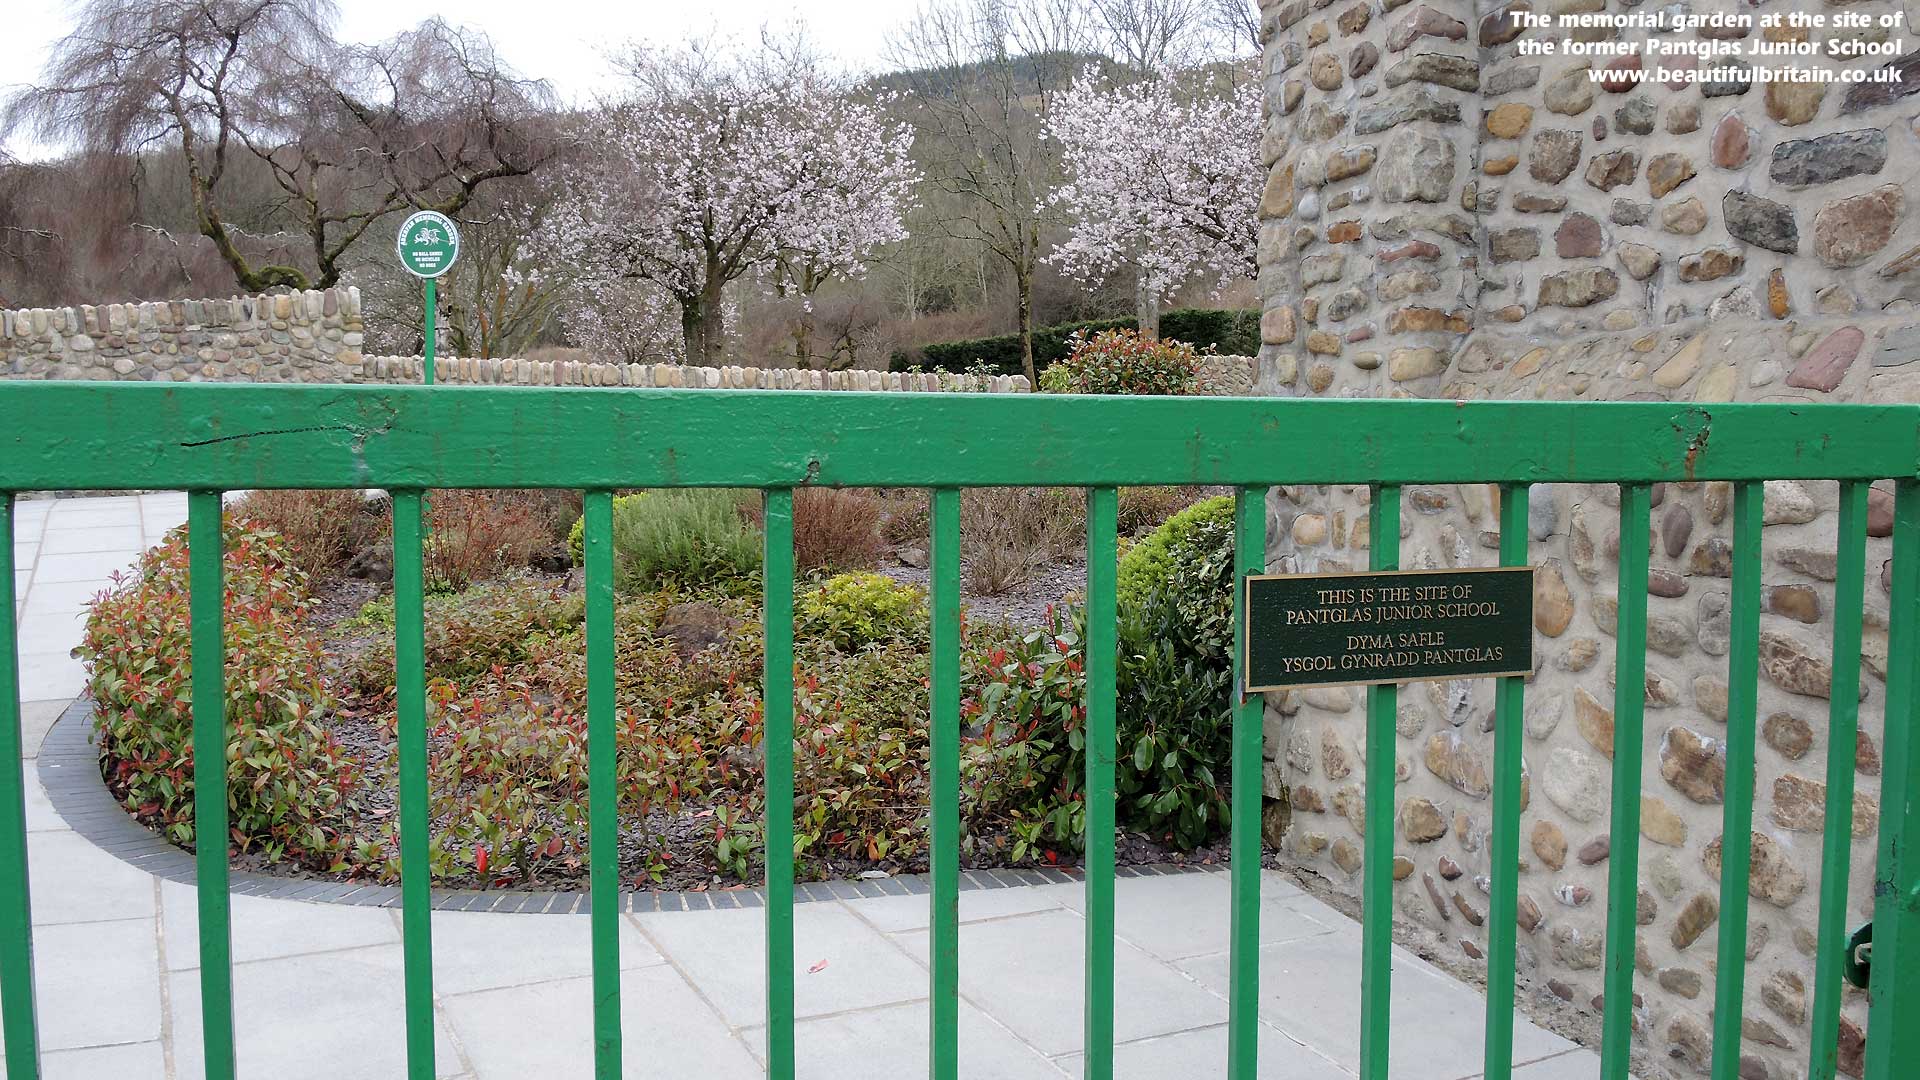 The entrance to the memorial garden in the village of Aberfan